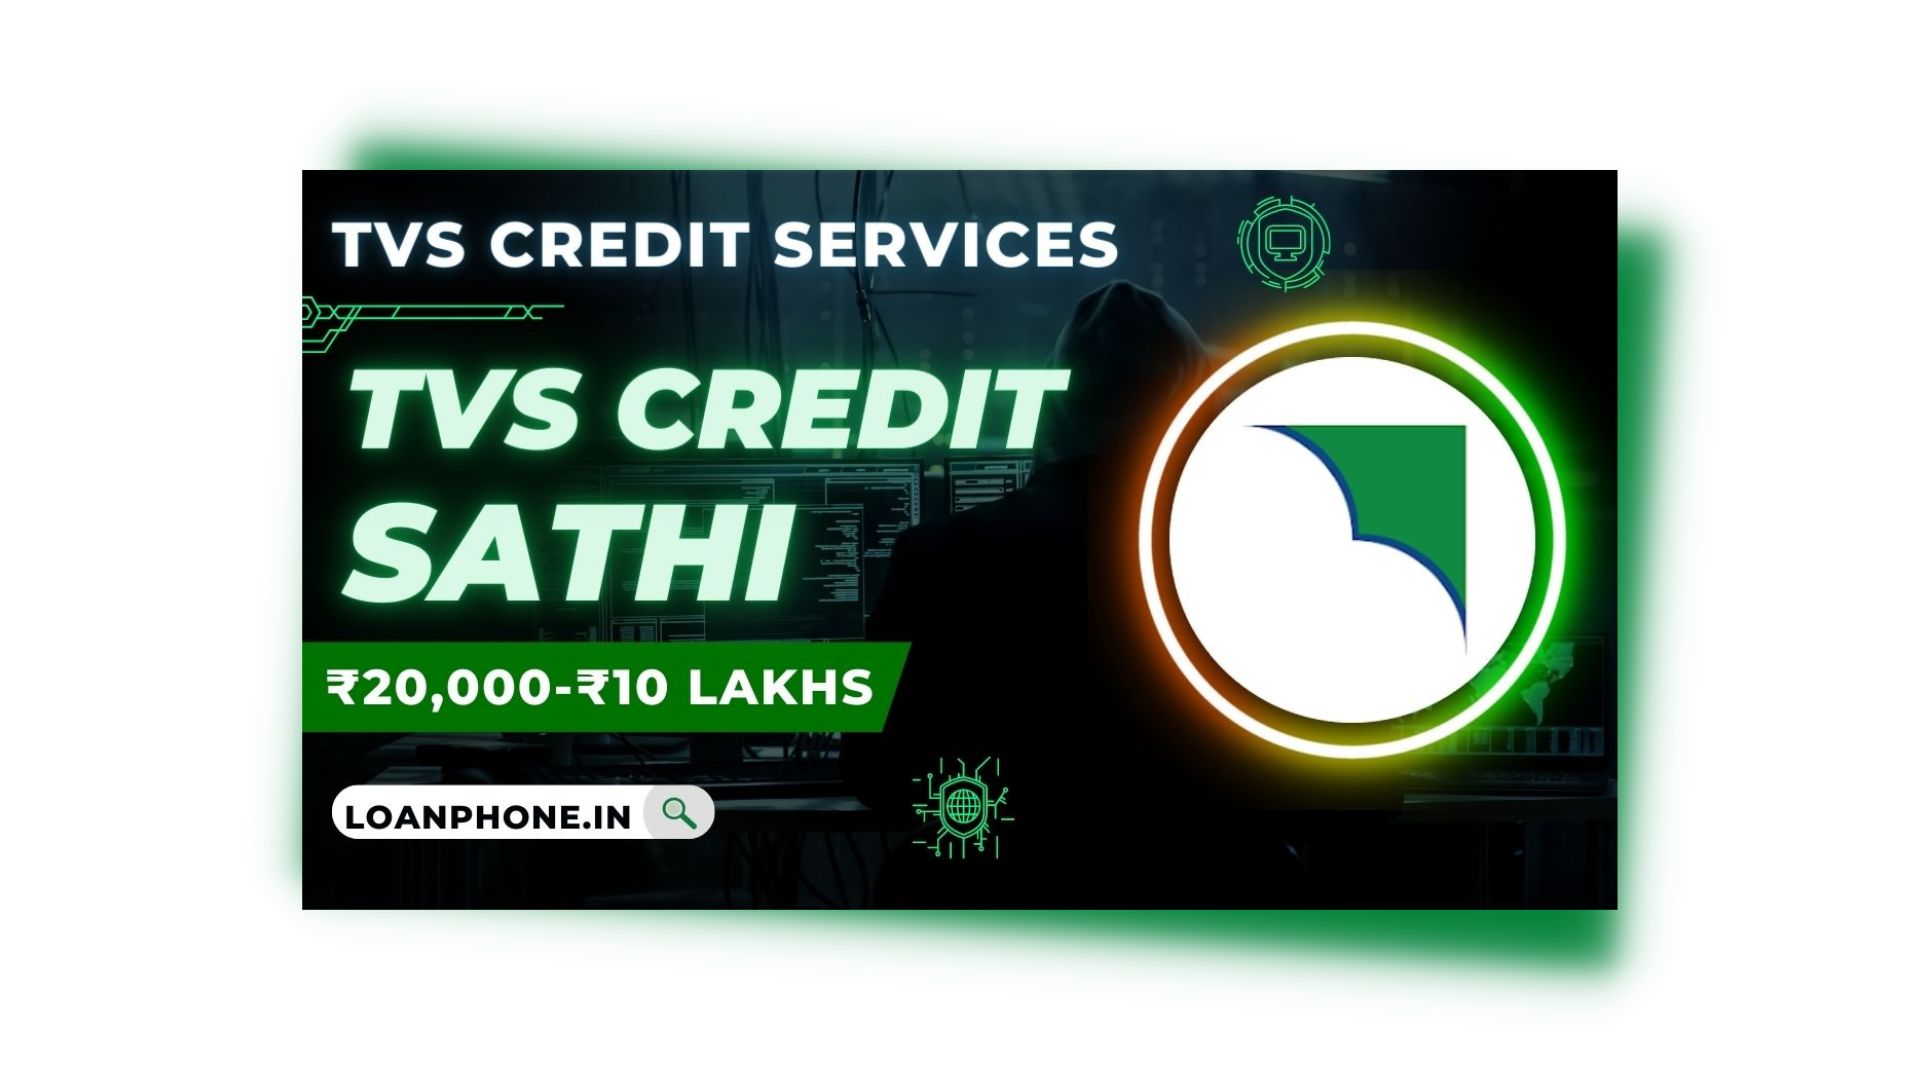 TVS Credit Saathi App | TVS Credit Saathi App Customer Care Number |